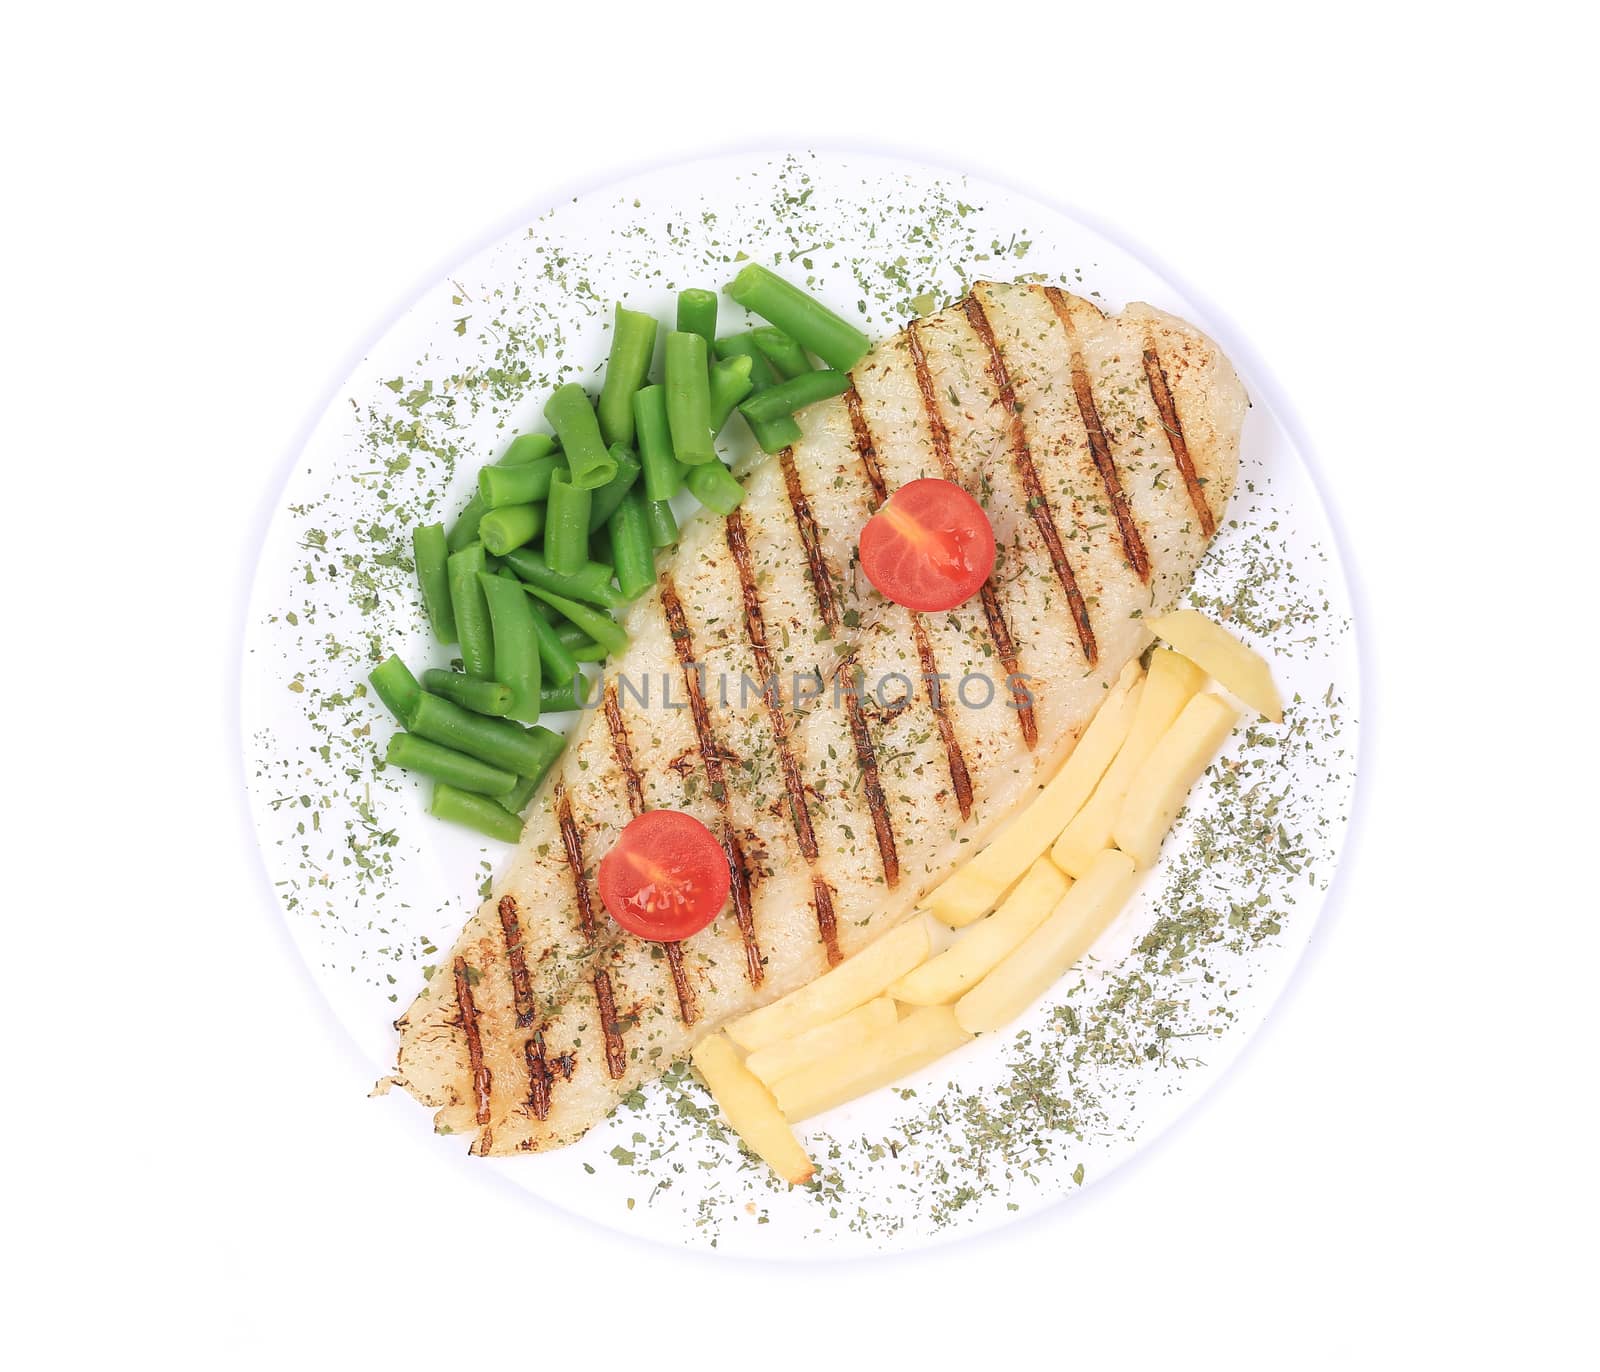 Pangasius fillet grilled with vegetables. Isolated on a white background.